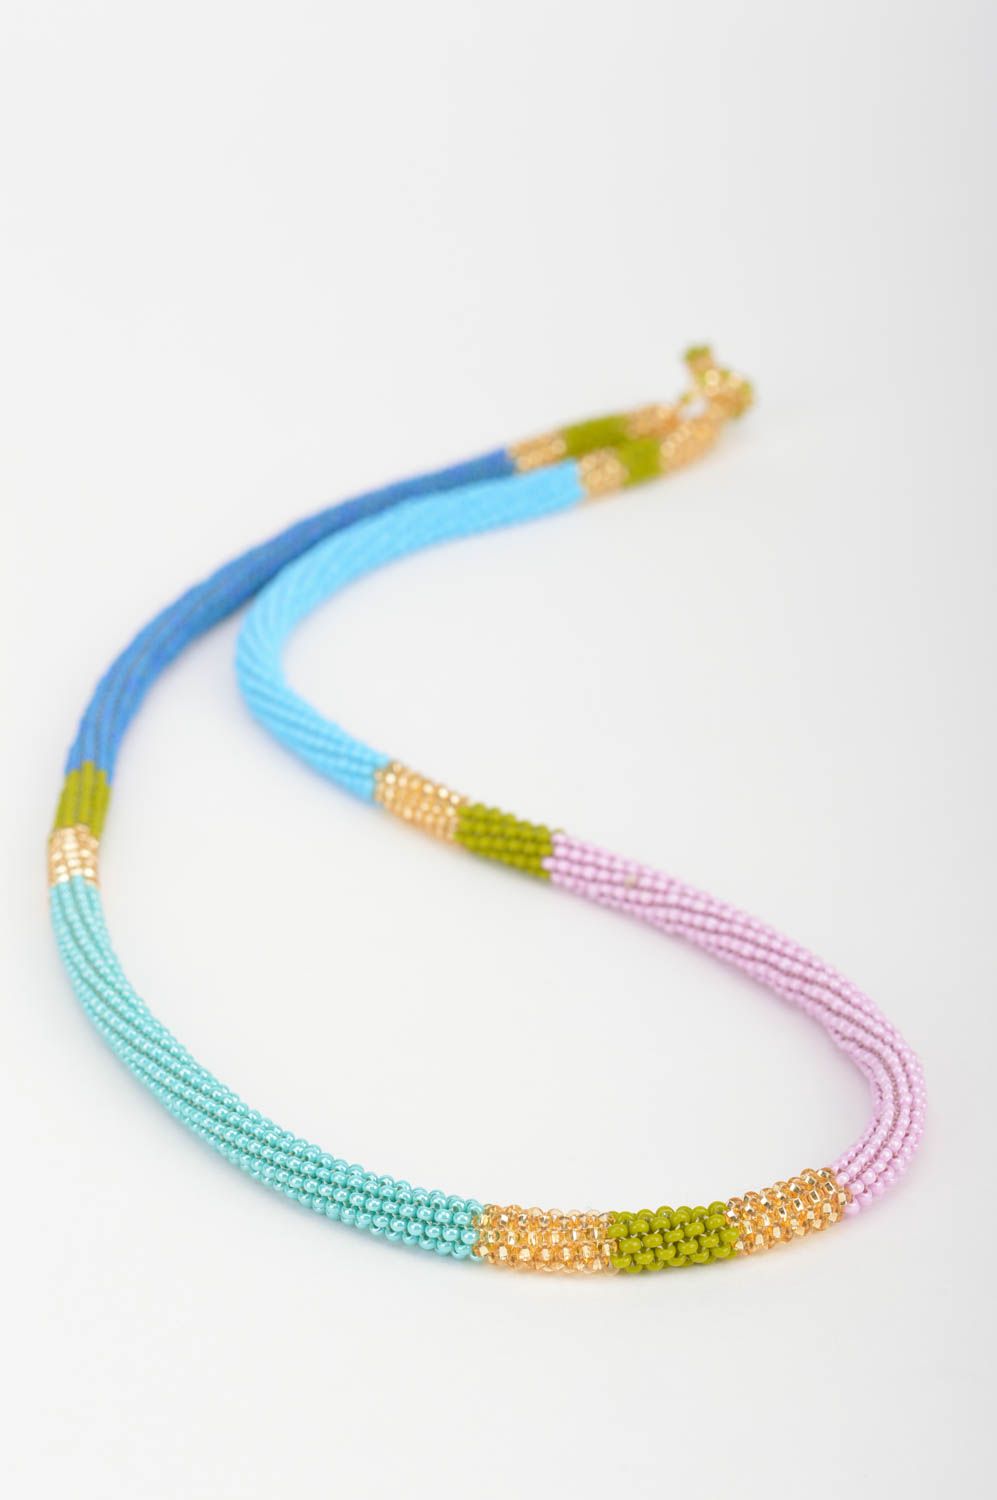 Bright stylish homemade designer beaded cord necklace for fashionistas photo 3